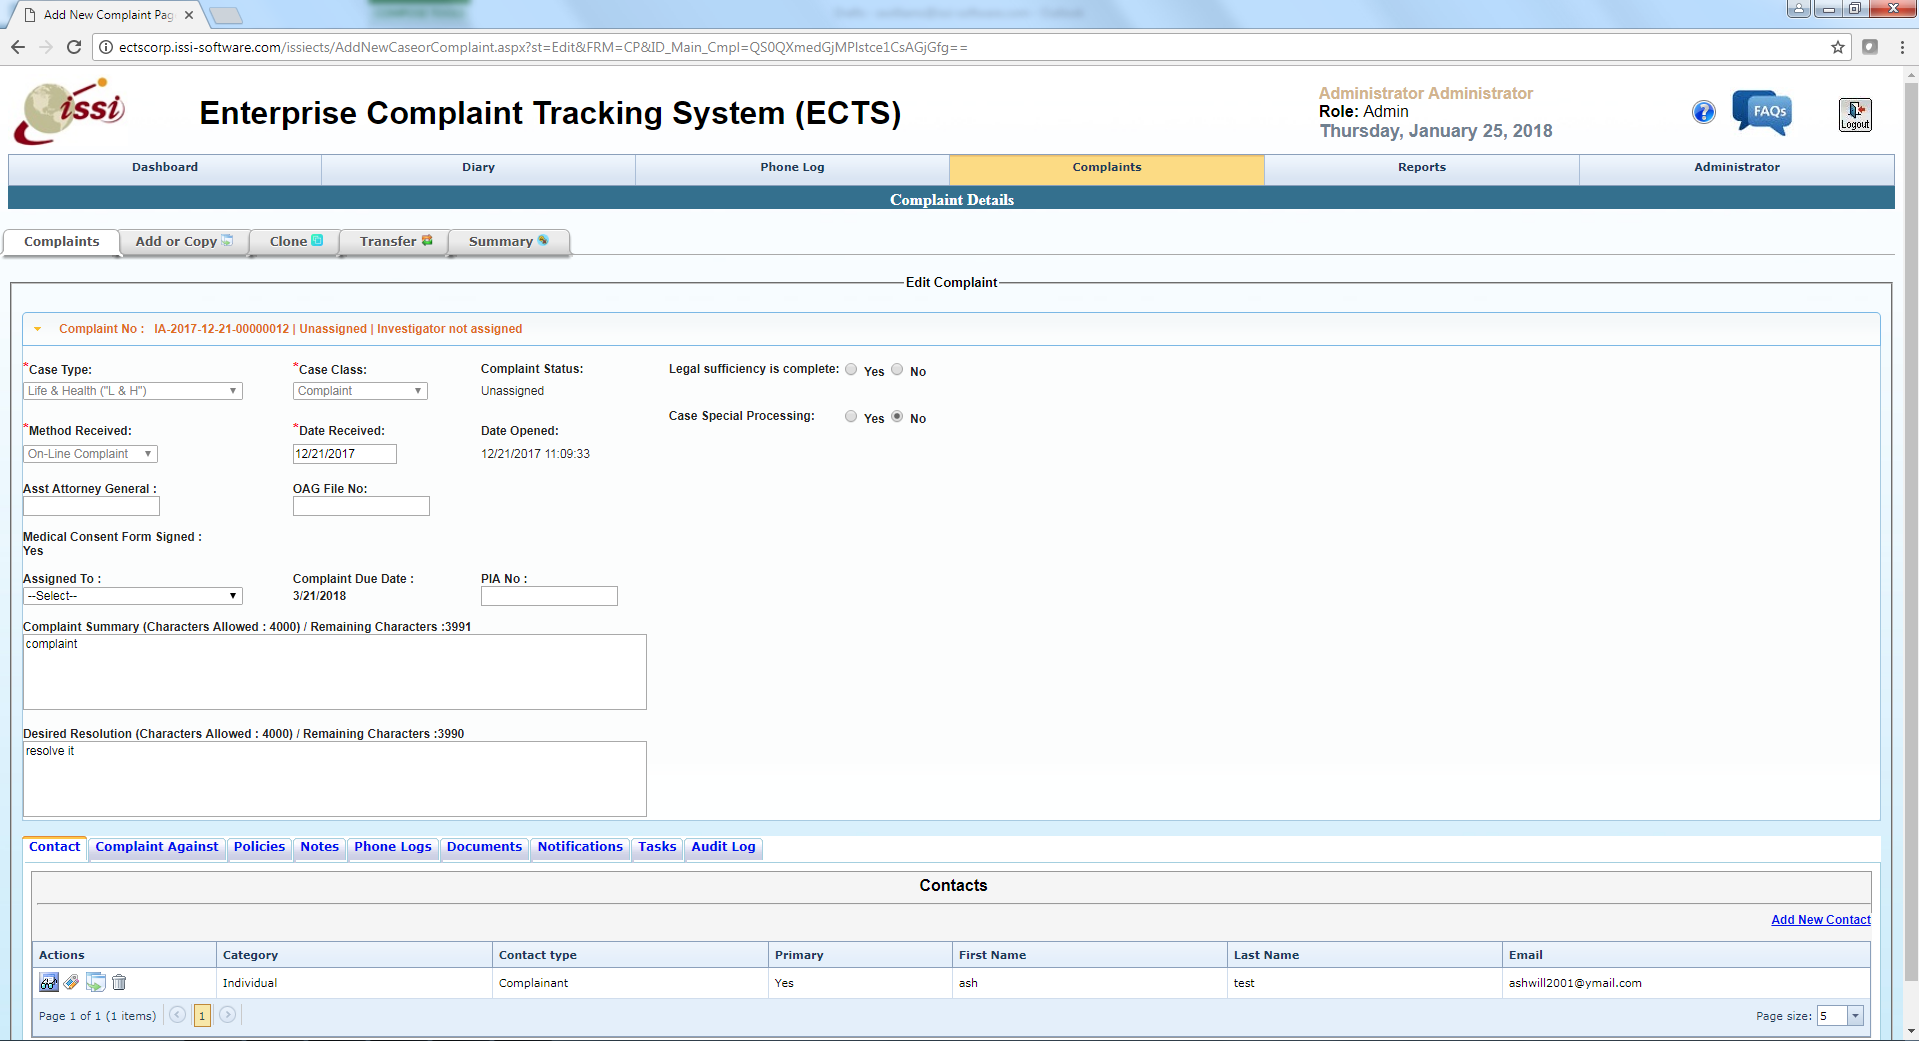 ECTS by International Software Systems c3b66ba7-42eb-4228-bbb4-c0b8a2d5434a.png